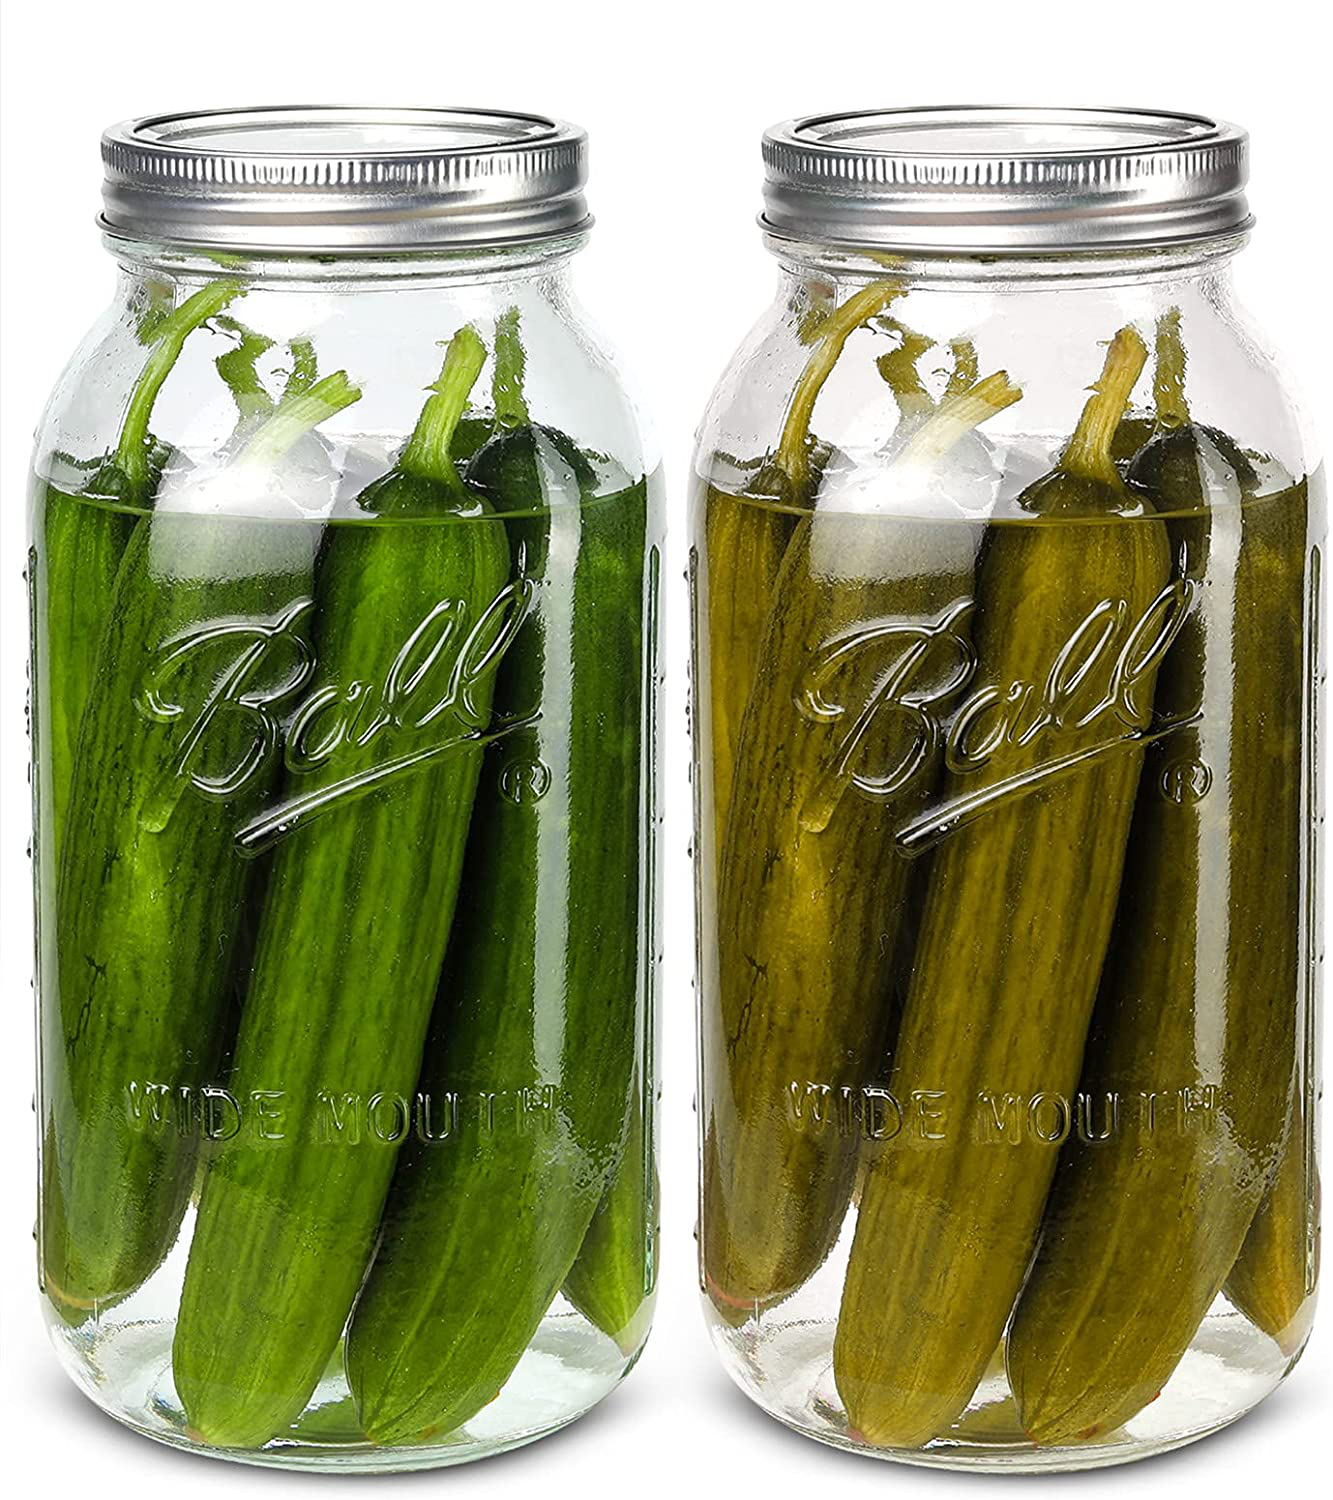 Wide Mouth Mason Jars 64 oz 2 Pack Half Gallon Mason Jars with Airtight Lid and Band, Large Clear Glass Mason Jars for Canning, Fermenting, Pickling, Storing